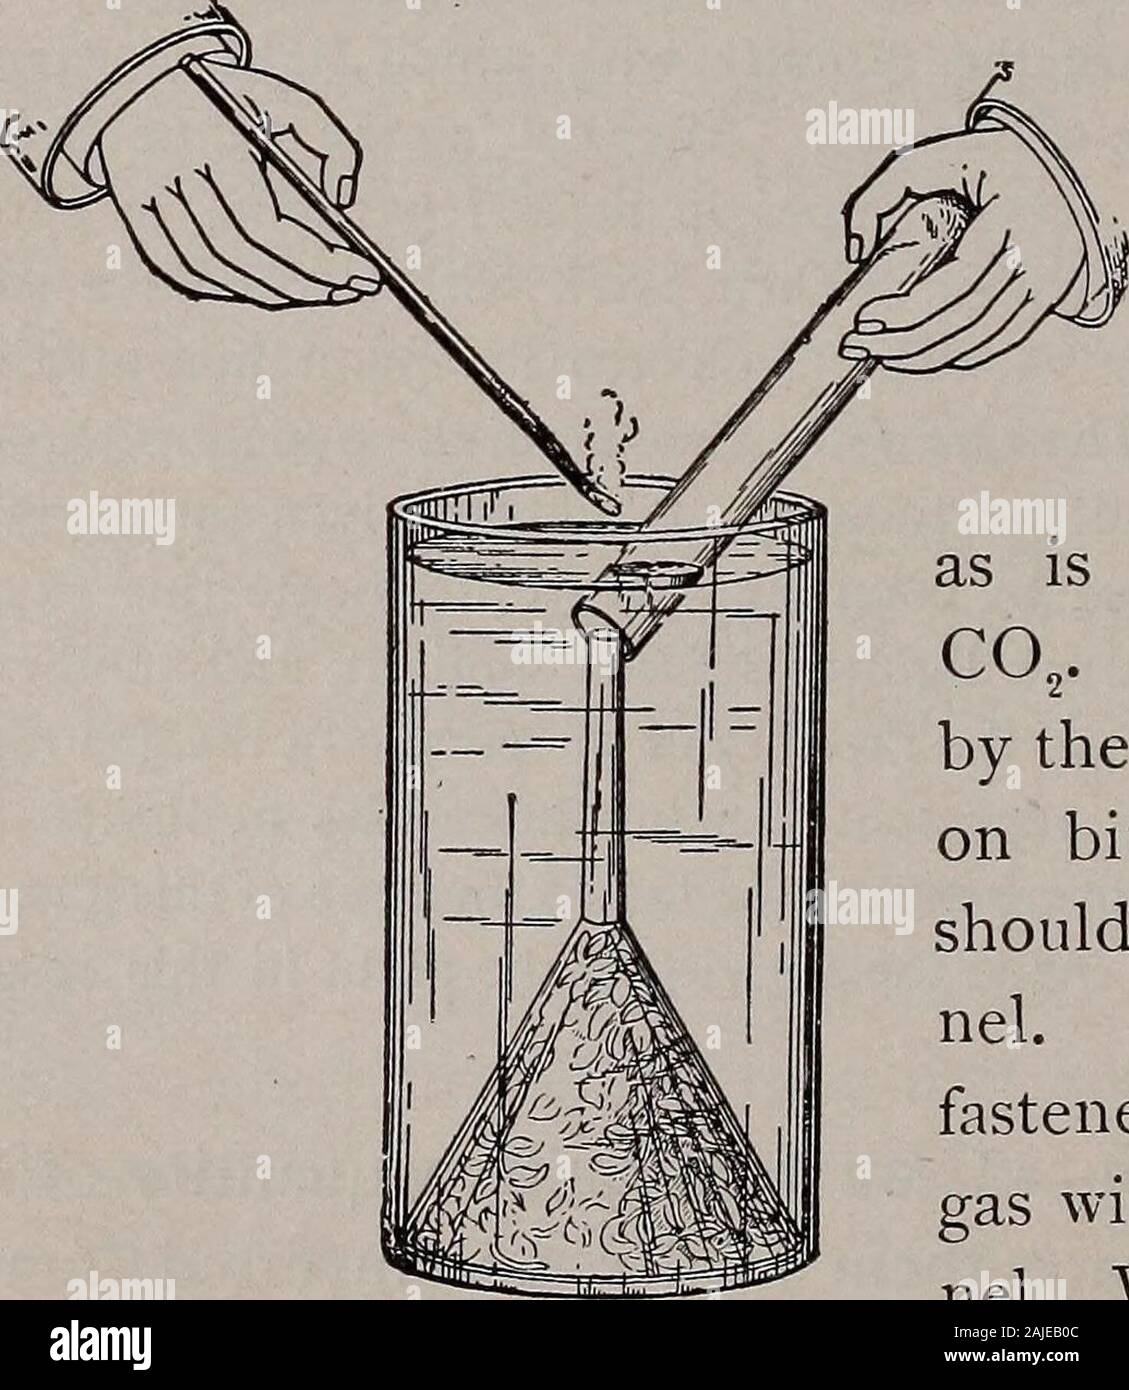 Elementary botany . 65 Apparatus for col- The gas will rise against the thumb. A dry Acting quantity of ° J from elodea. soft pine splinter should be then lighted, and (